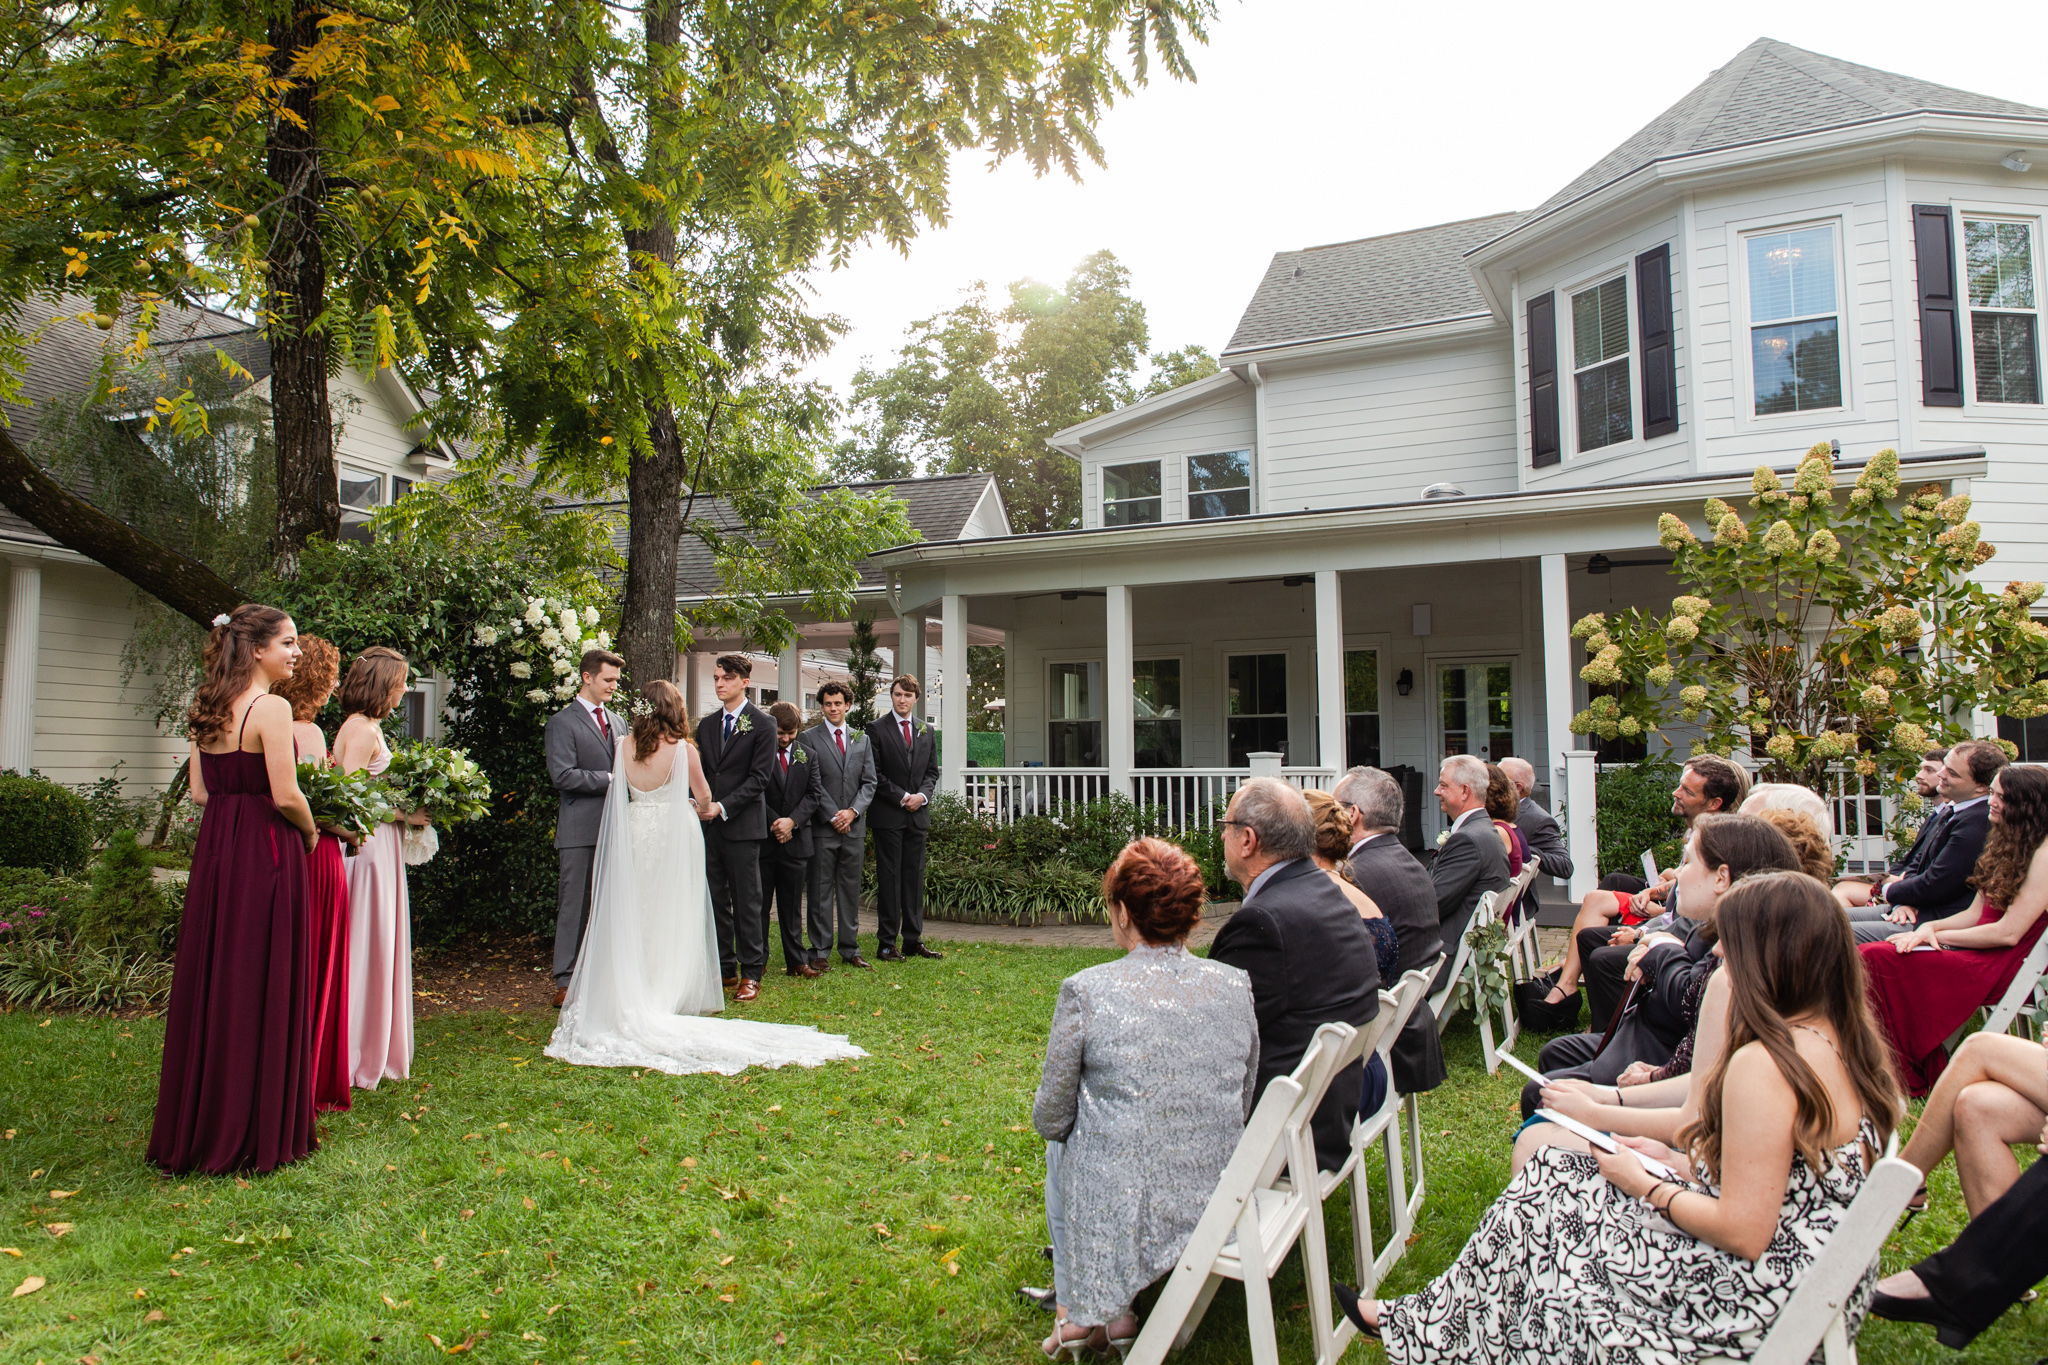 Saying I do at The Matthews House with ceremony on the green grass lawn